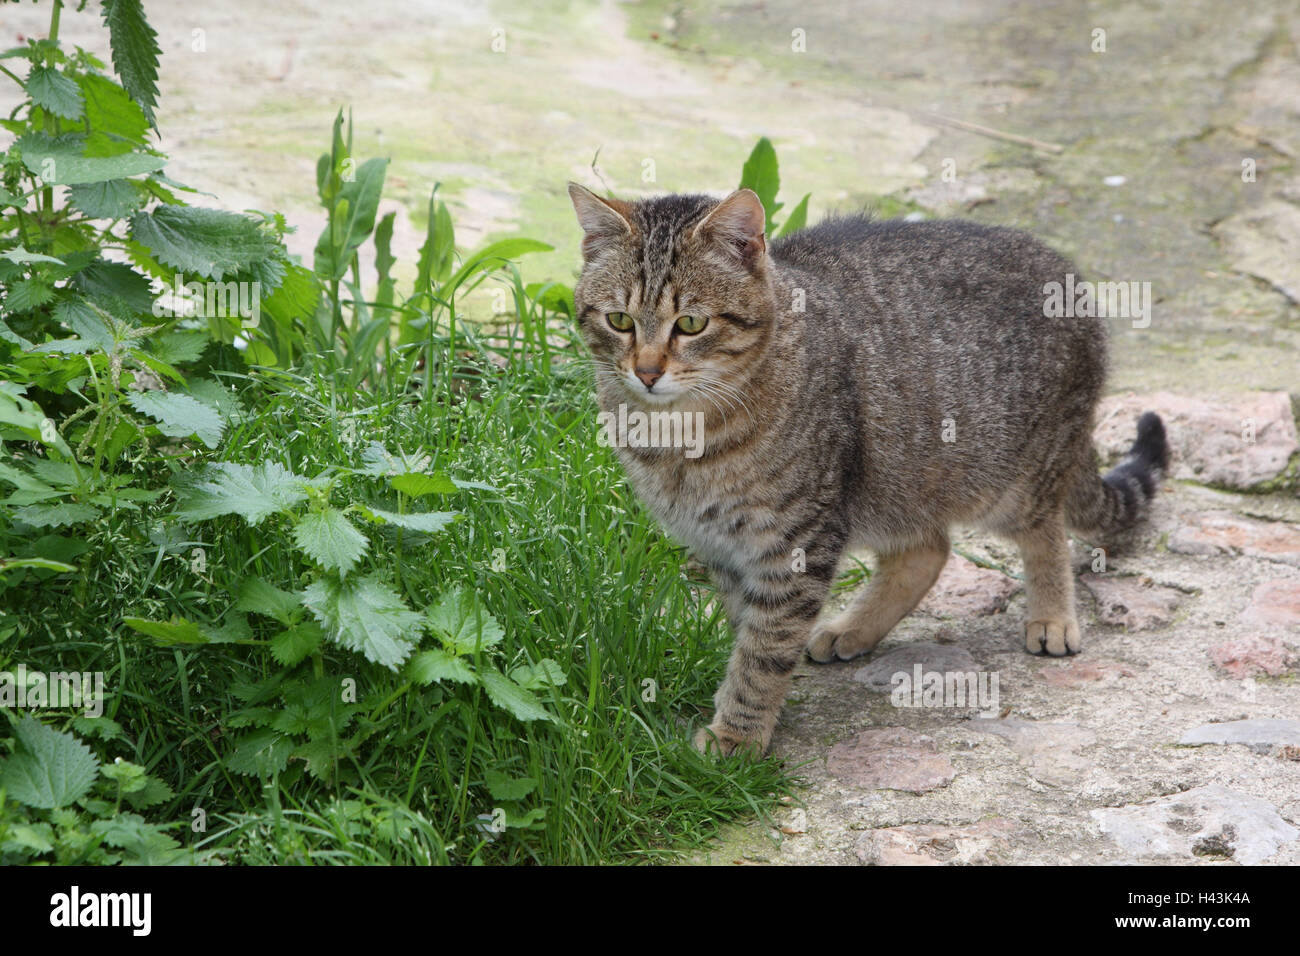 Cat, striped, animals, mammals, pets, small cats, Felidae, domesticates, house cat, without Lord, day release prisoners, stray, street cat, stand, wayside, individually, all alone, outside, Spain, Stock Photo